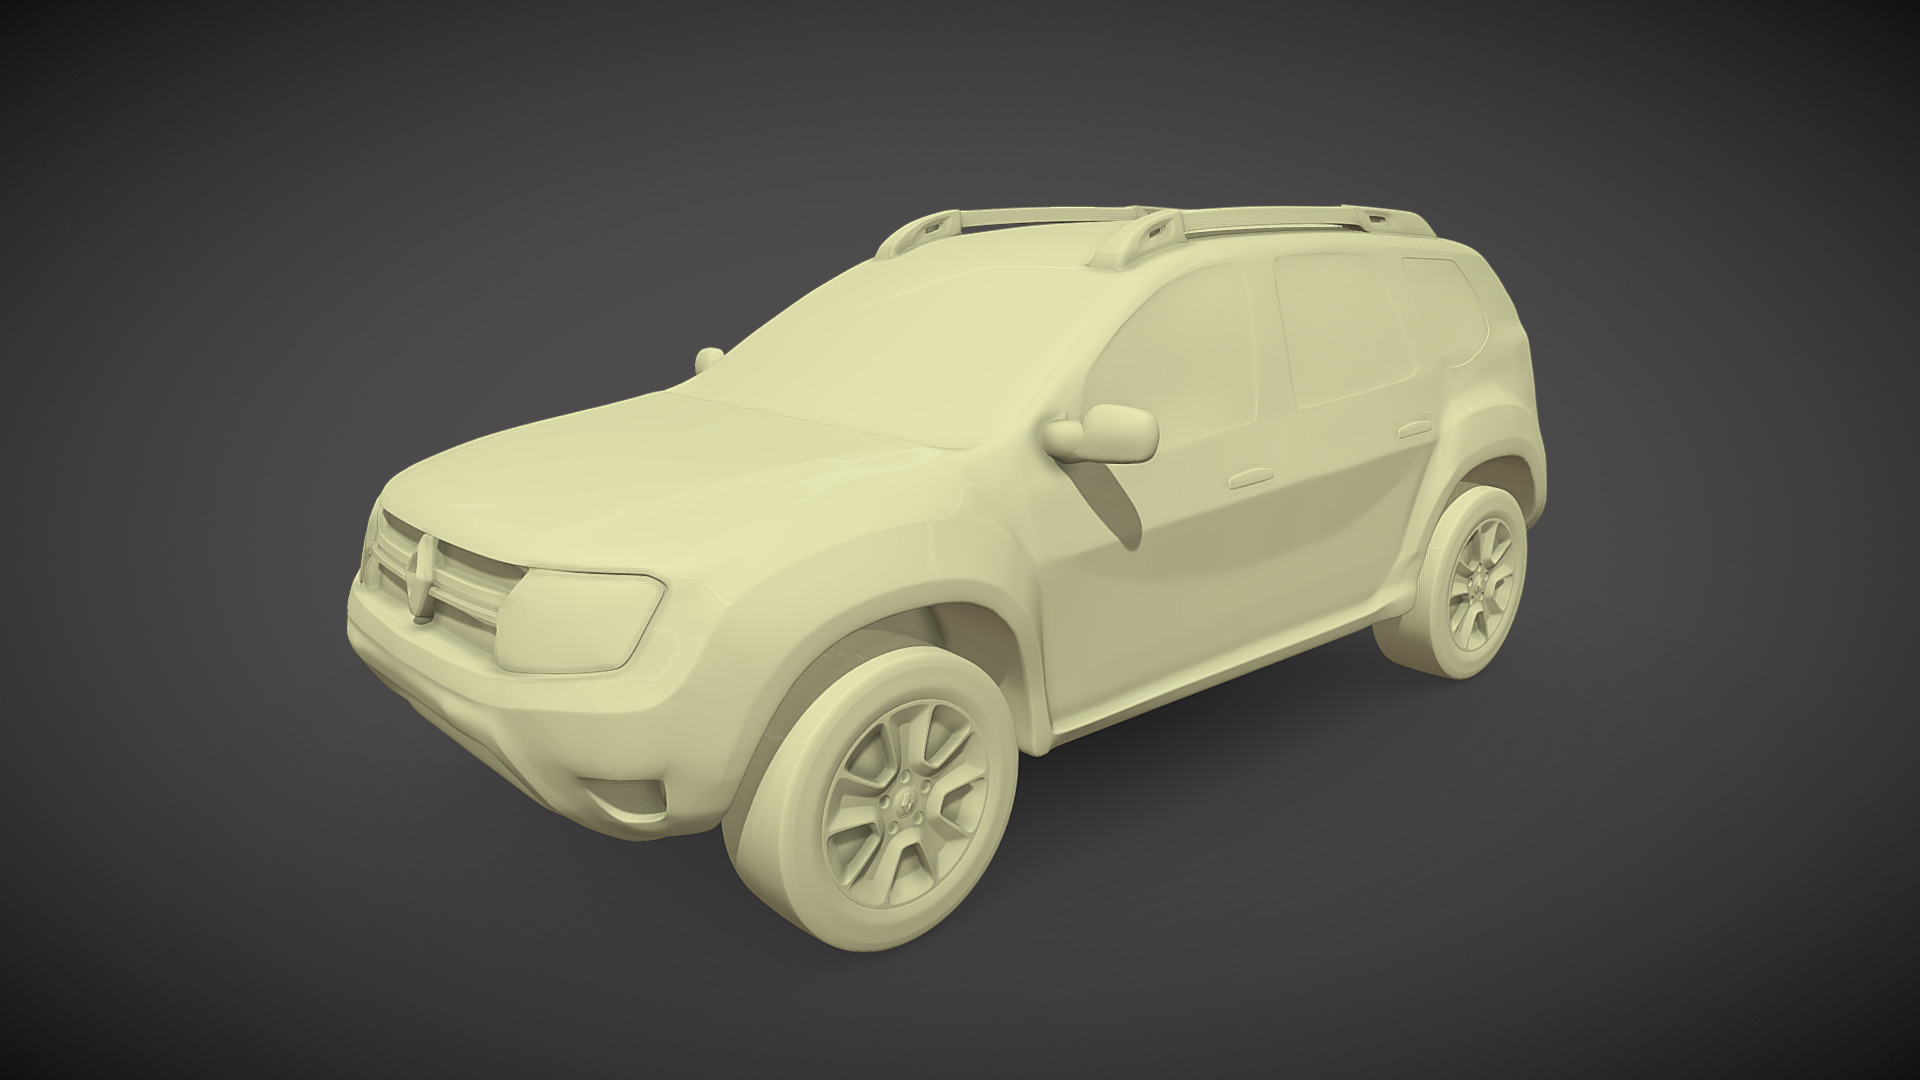 3D model Renault Duster - This is a 3D model of the Renault Duster. The 3D model is about a small white car.